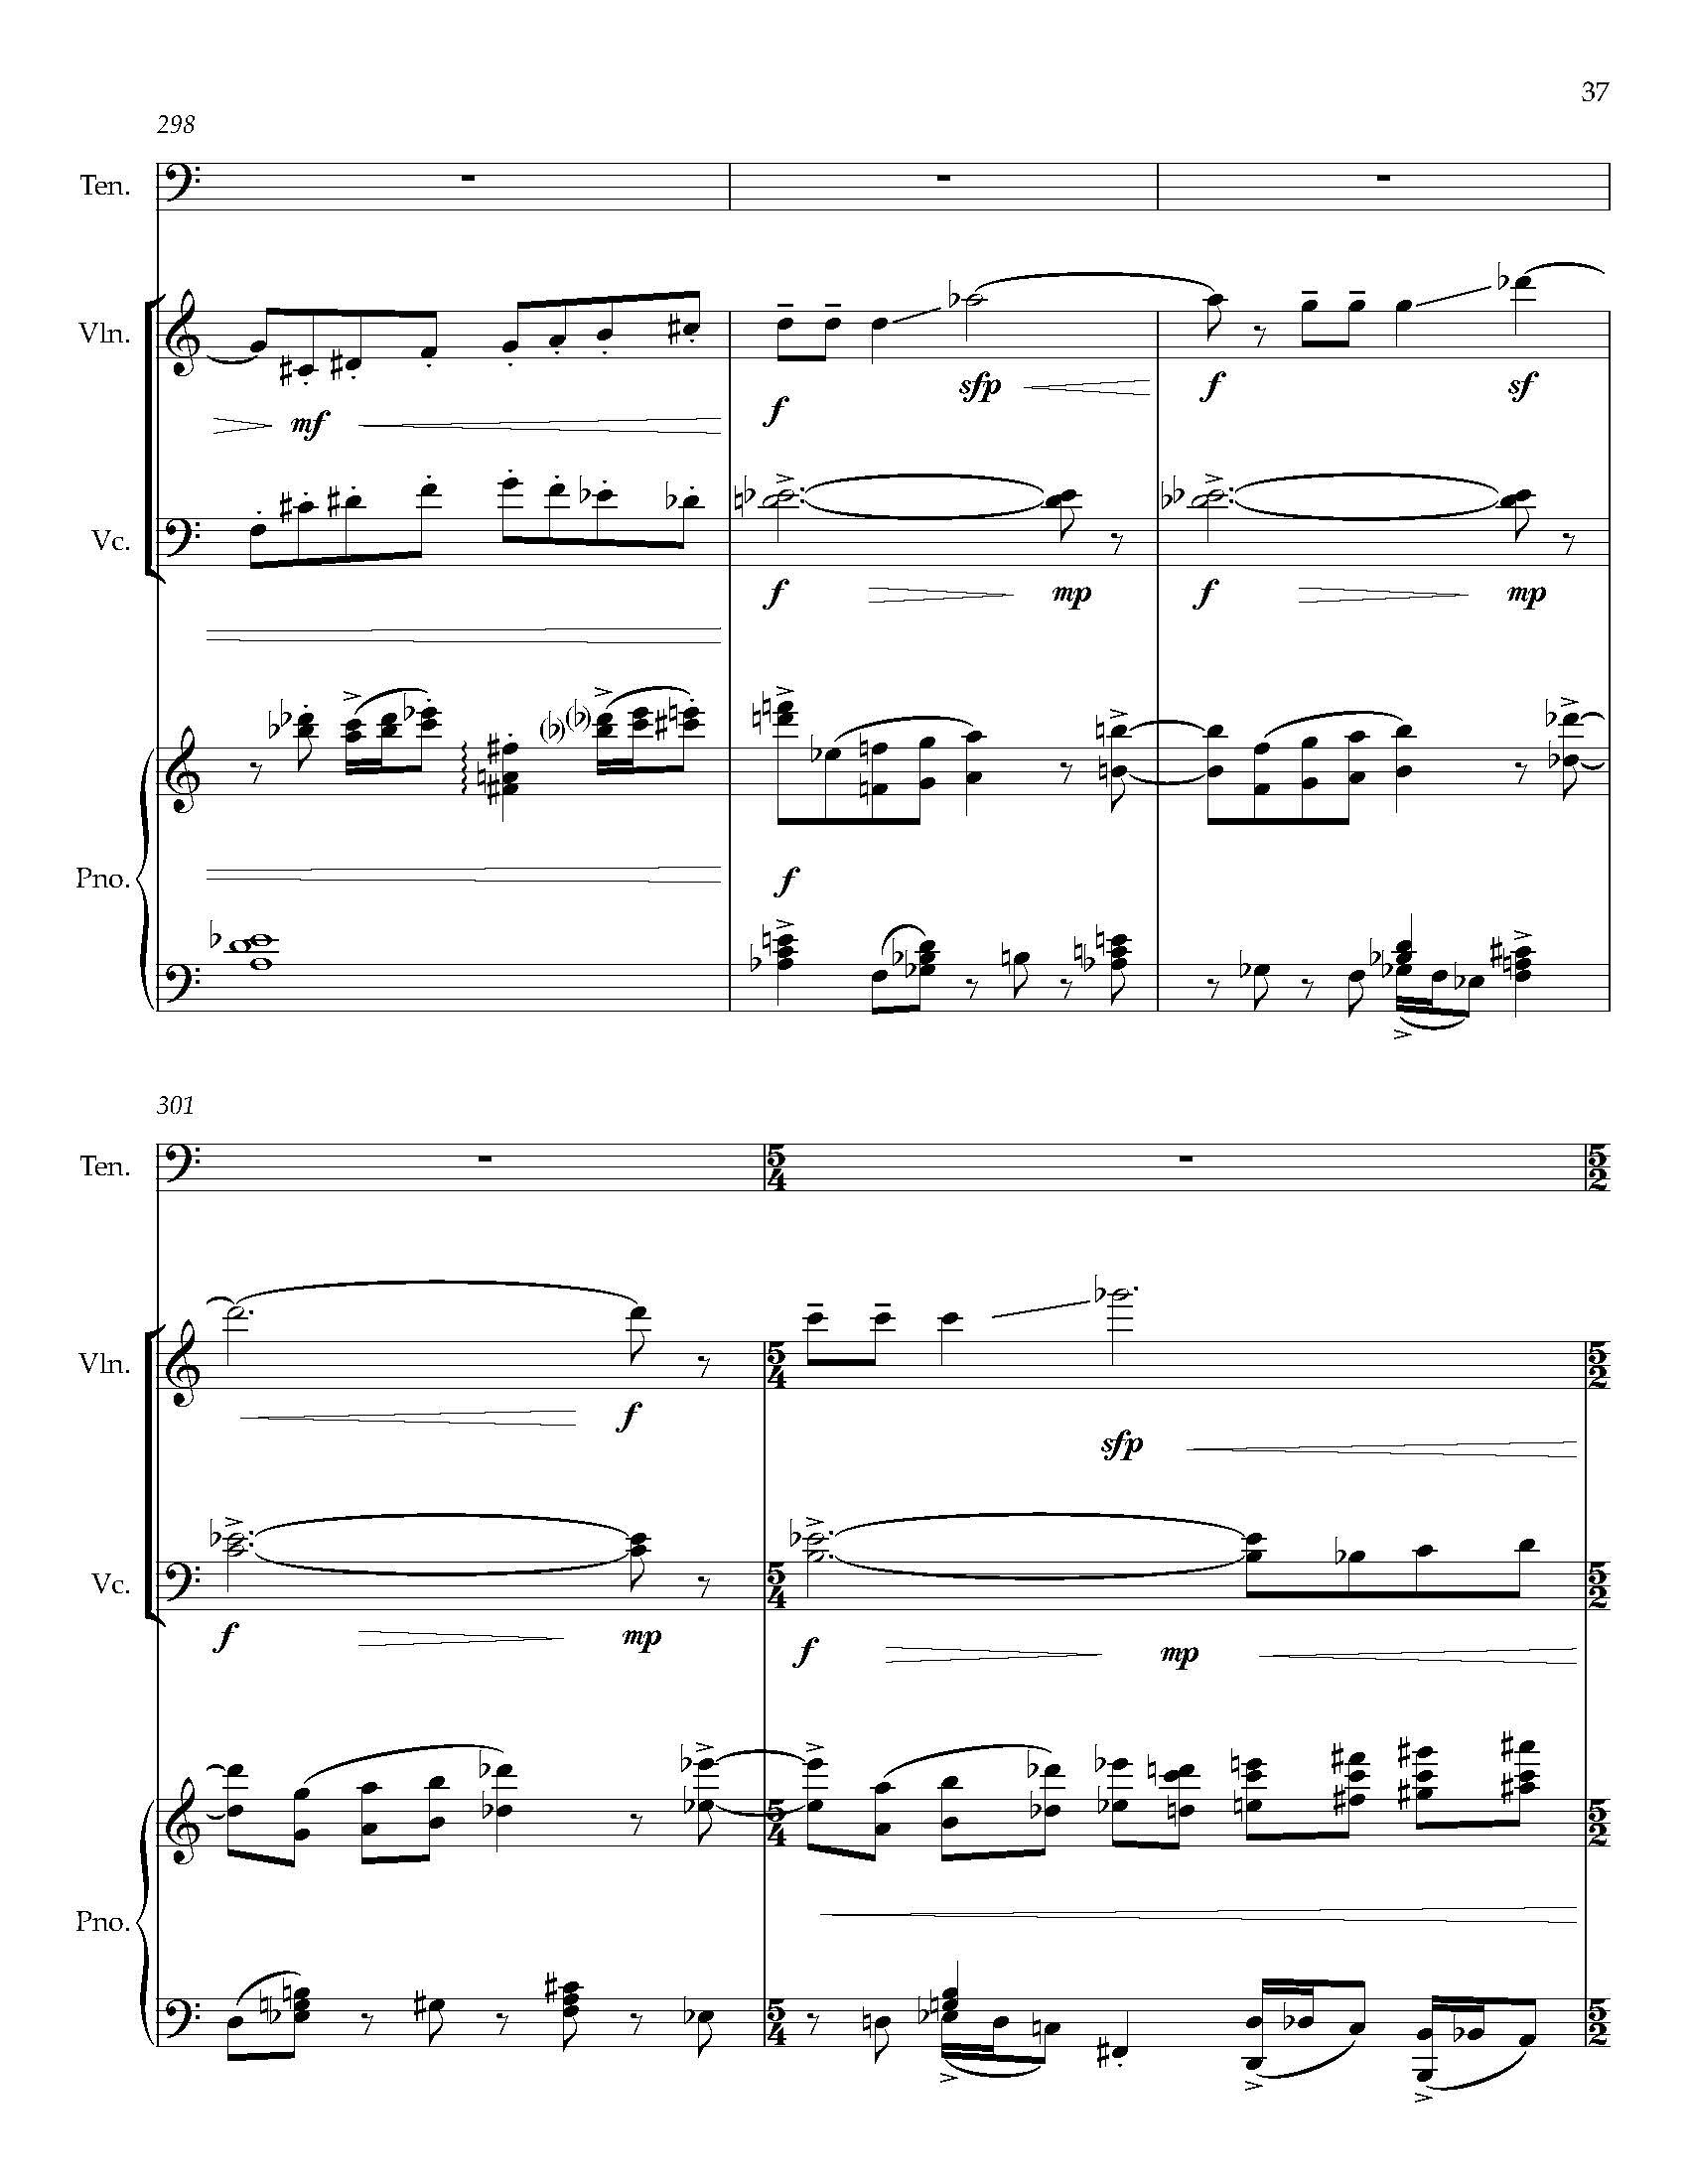 Gursky Songs - Complete Score_Page_45.jpg